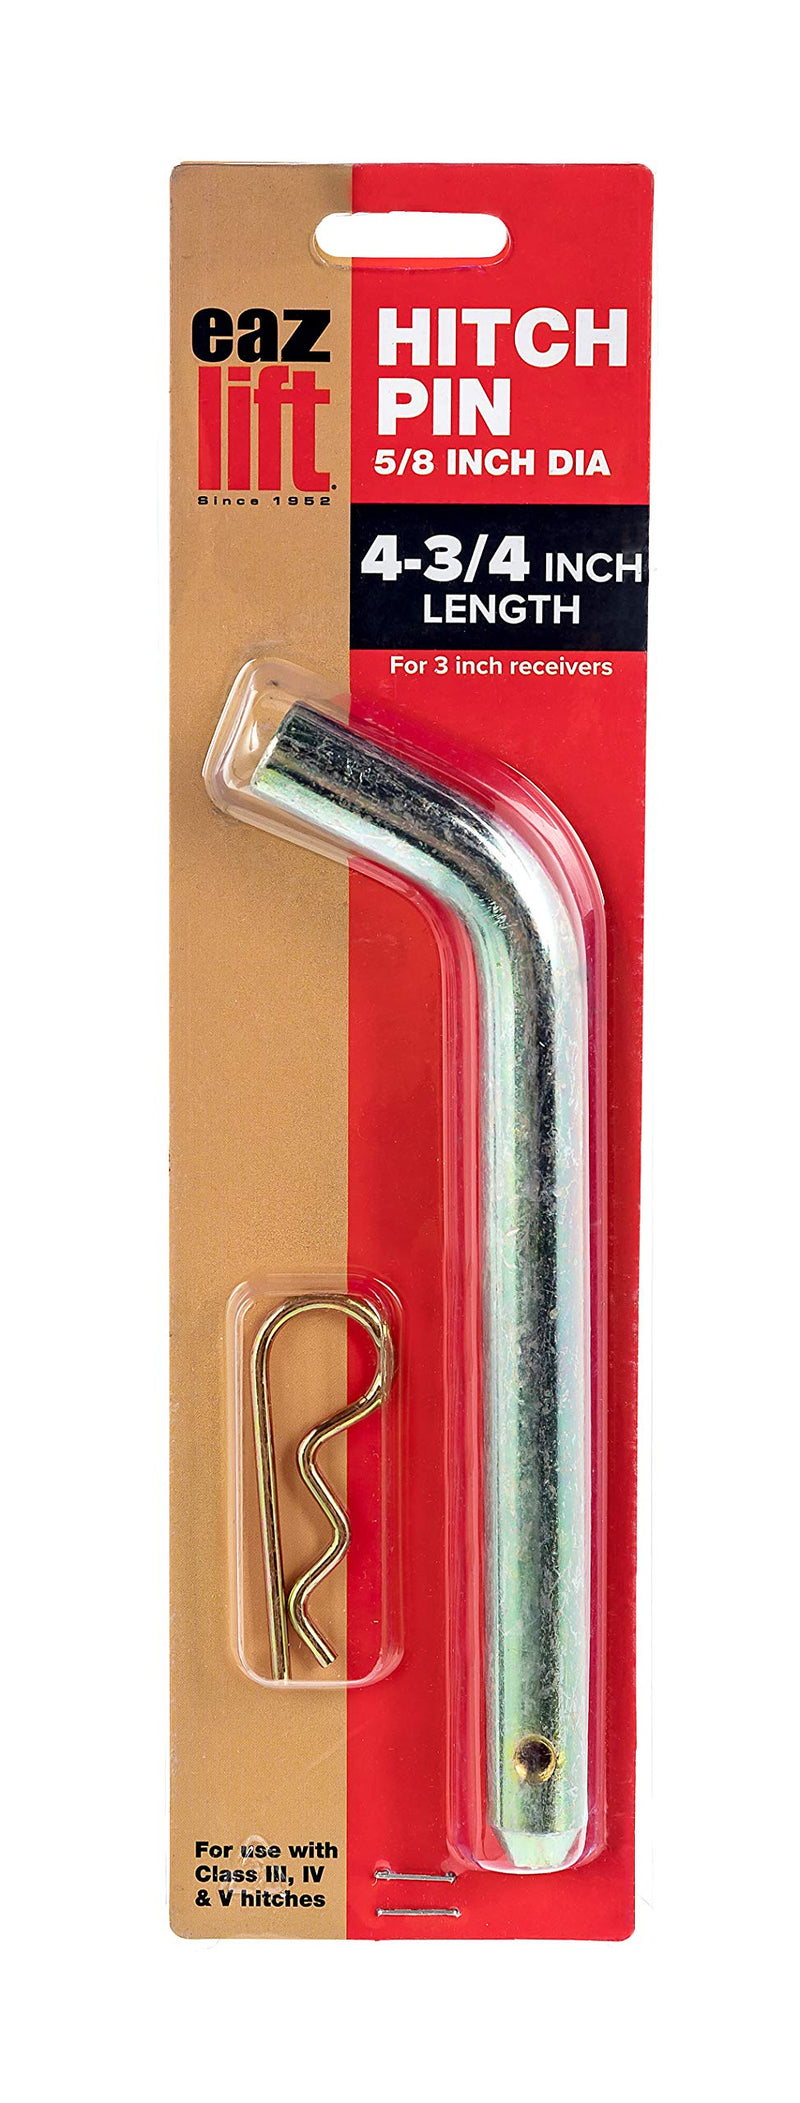  [AUSTRALIA] - Eaz-Lift Receiver Hitch Pin and Clip, 3-inch - Safely Secures Receiver-Hitch Mounted Accessories in Place While Towing - Features a 5/8-inch Diameter Hitch Pin and 4-3/4-inches Usable Length (48016)